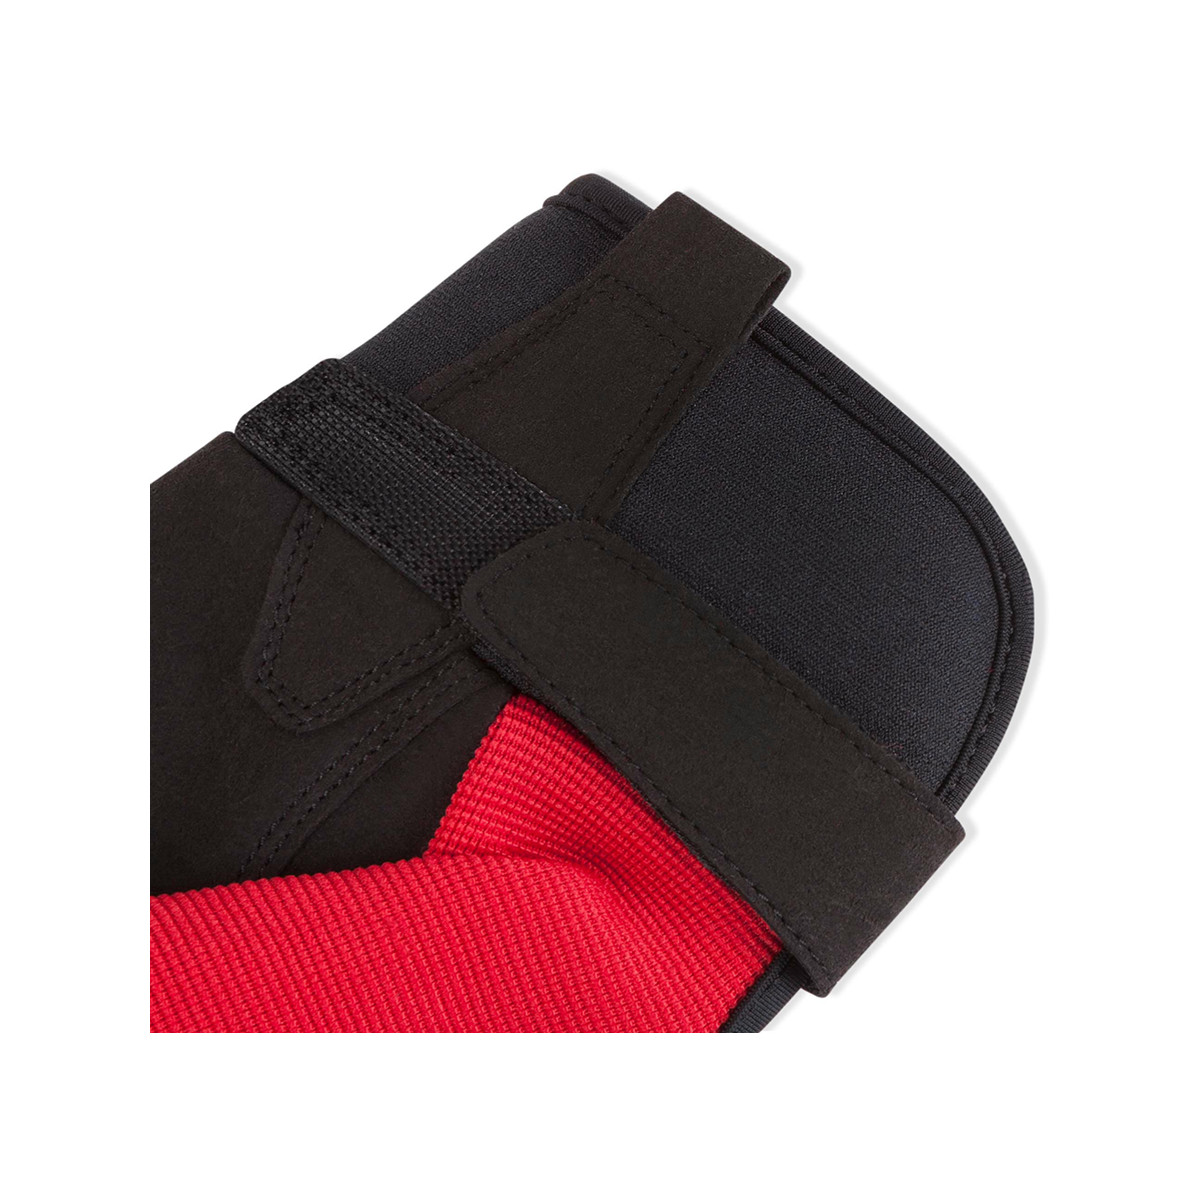 Musto Essential gants de voile doigts courts rouge, taille S